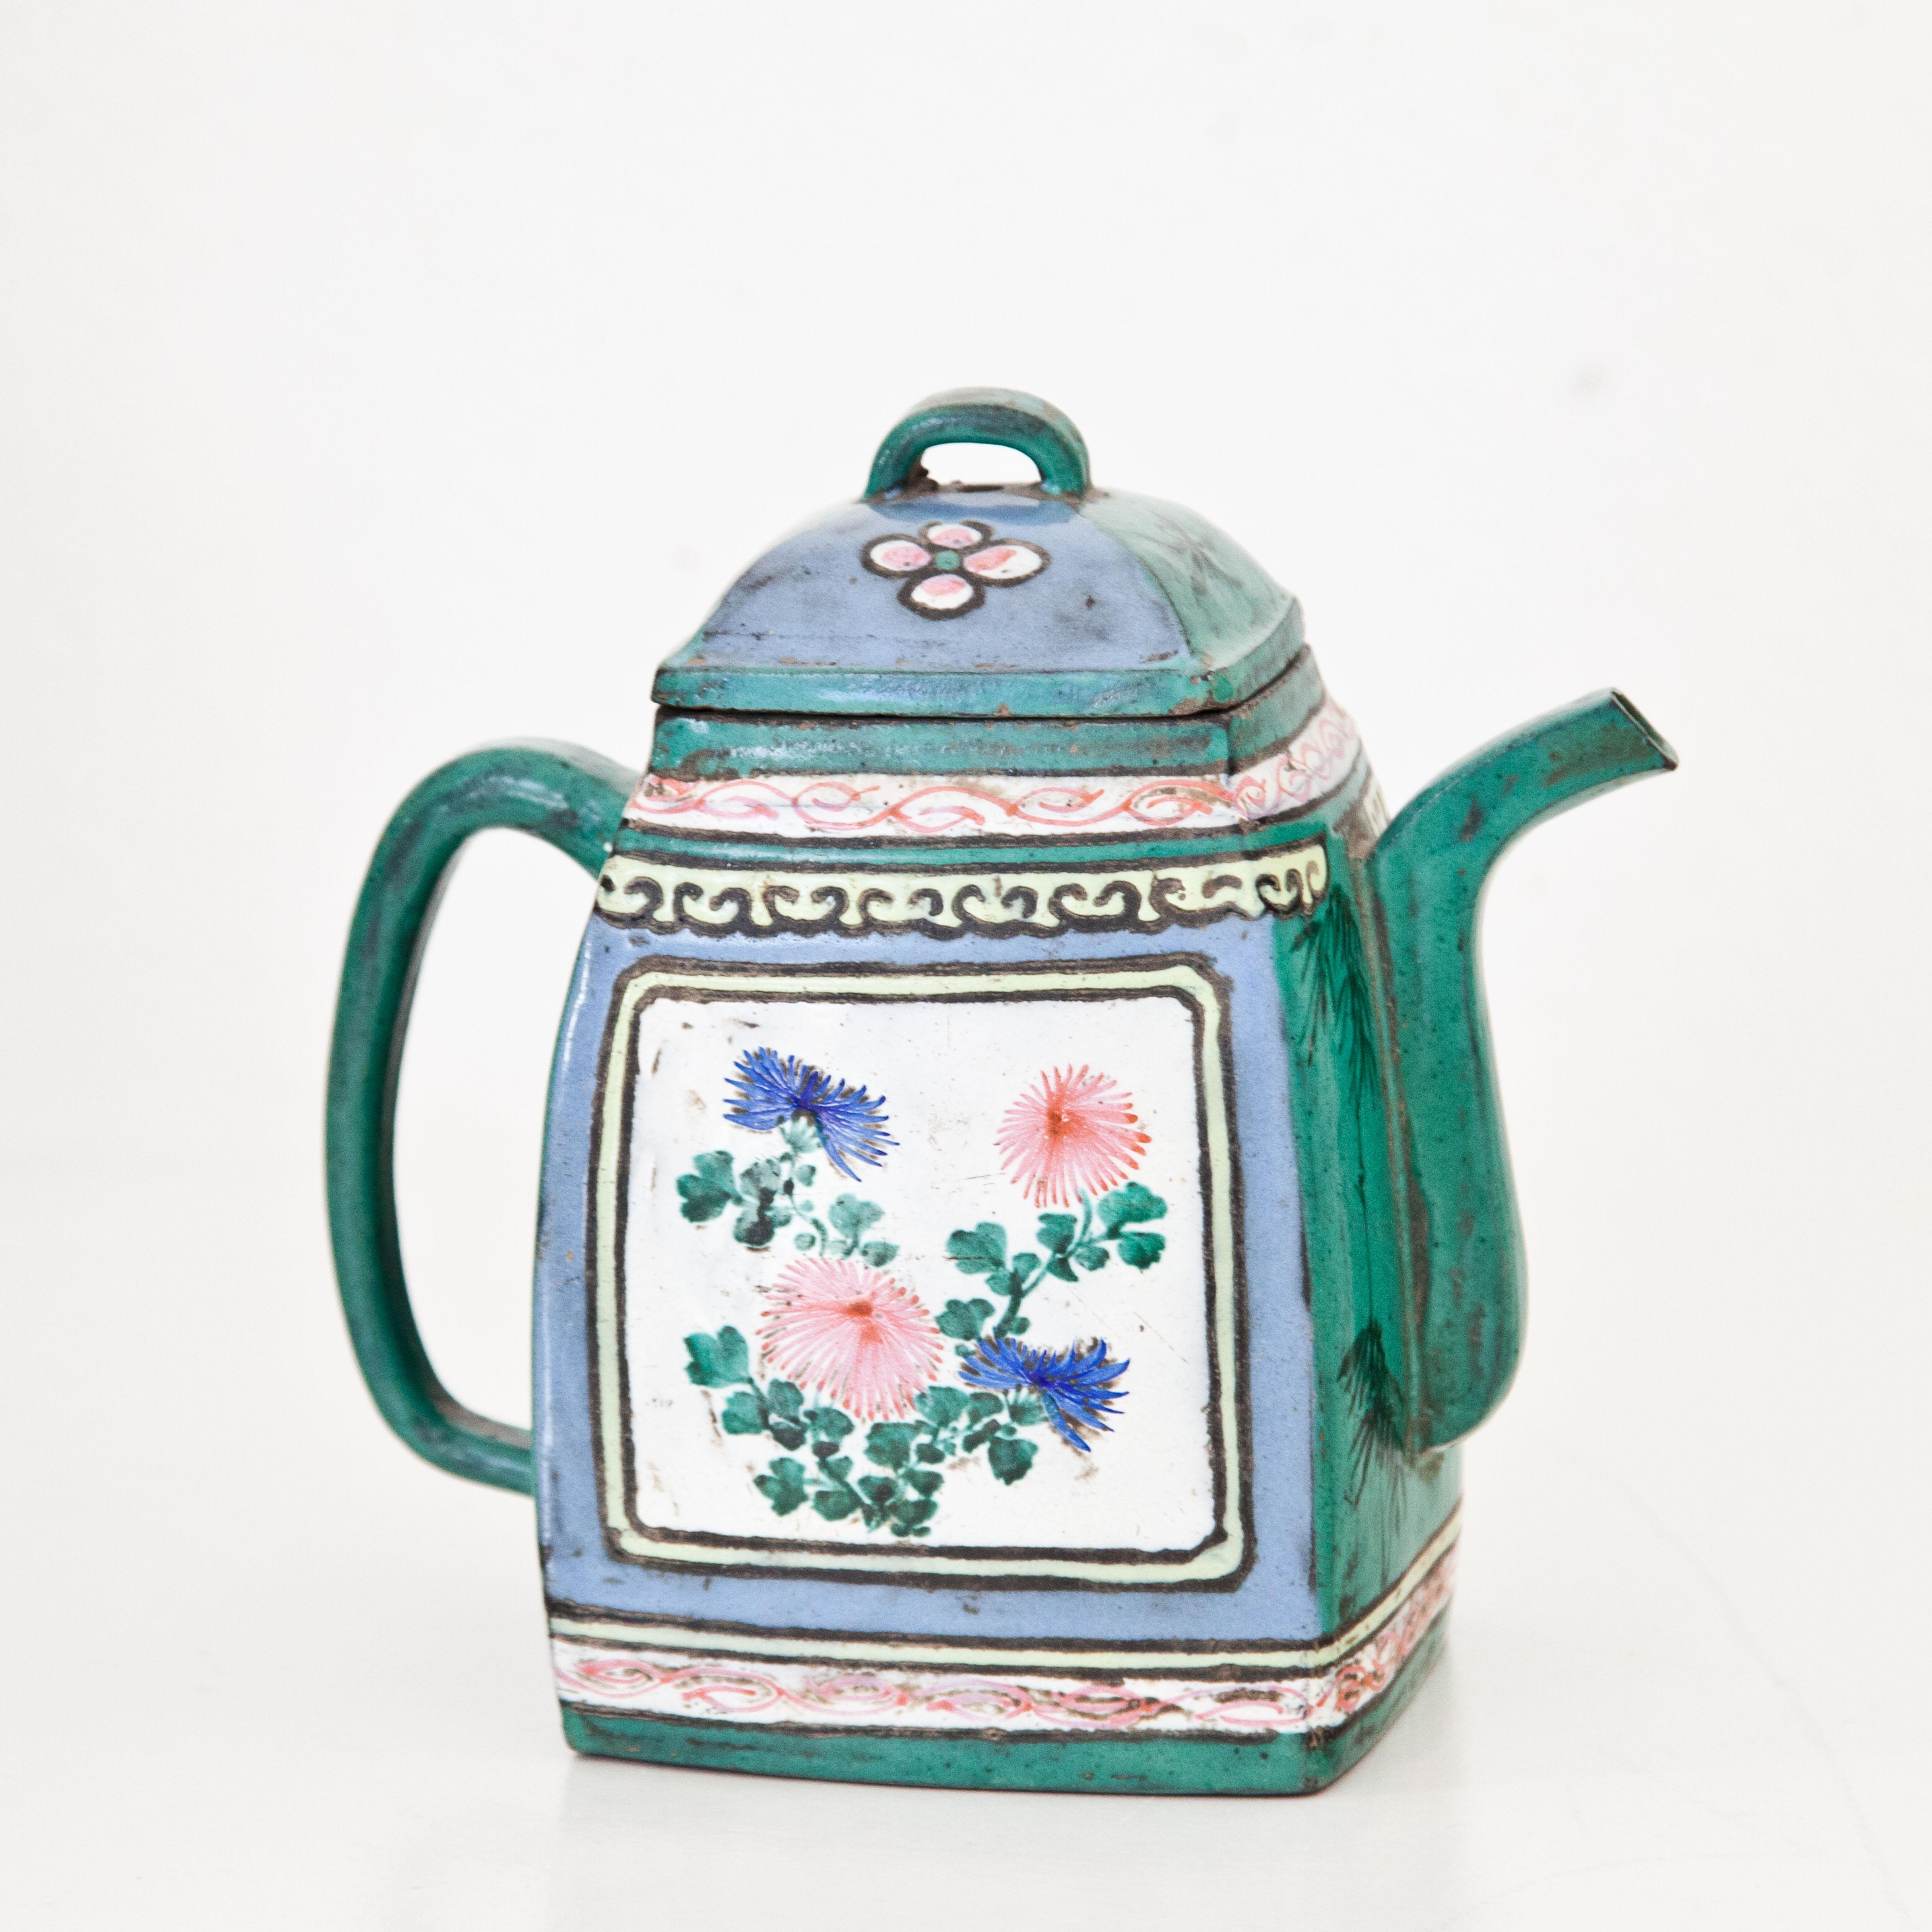 Small teapot with square basic shape and green-blue fond on brown clay. The sides with polychrome floral and bird motifs. Small crack in the lid. Maker‘s mark Xu Fei Long stamped on the bottom.